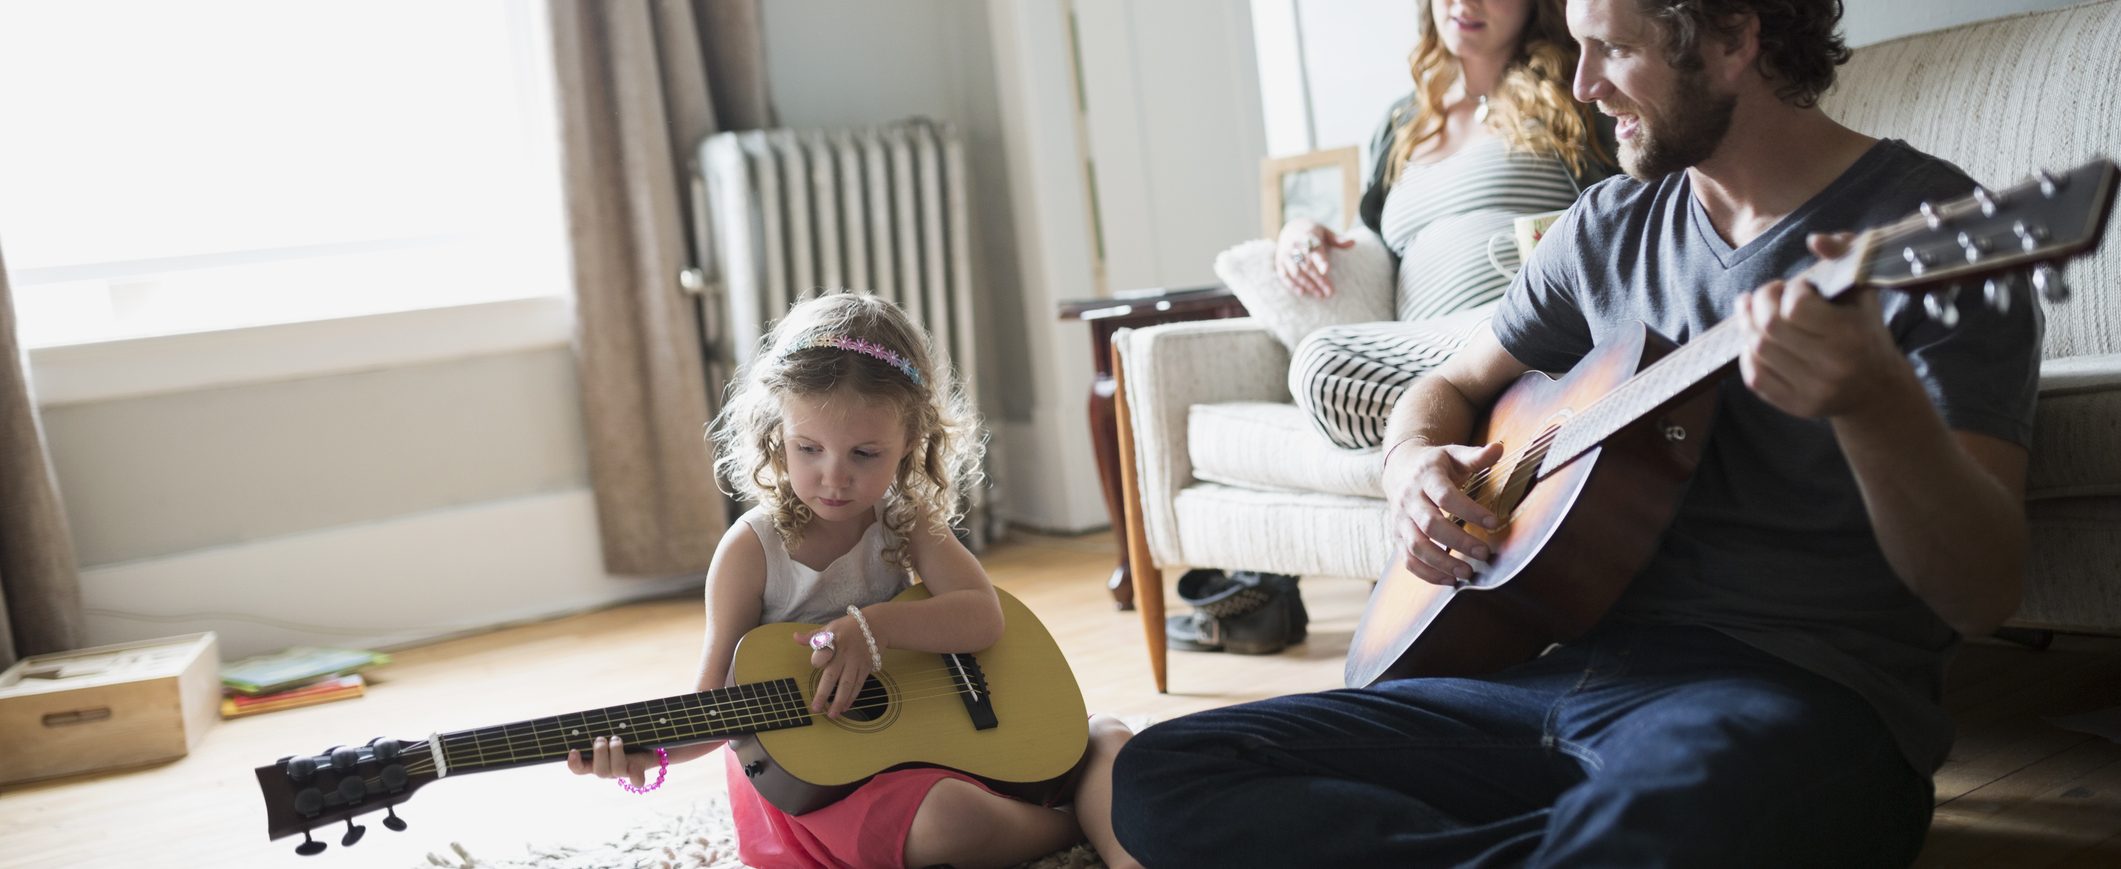 A man and a little girl playing guitars, while a woman sits on a couch.